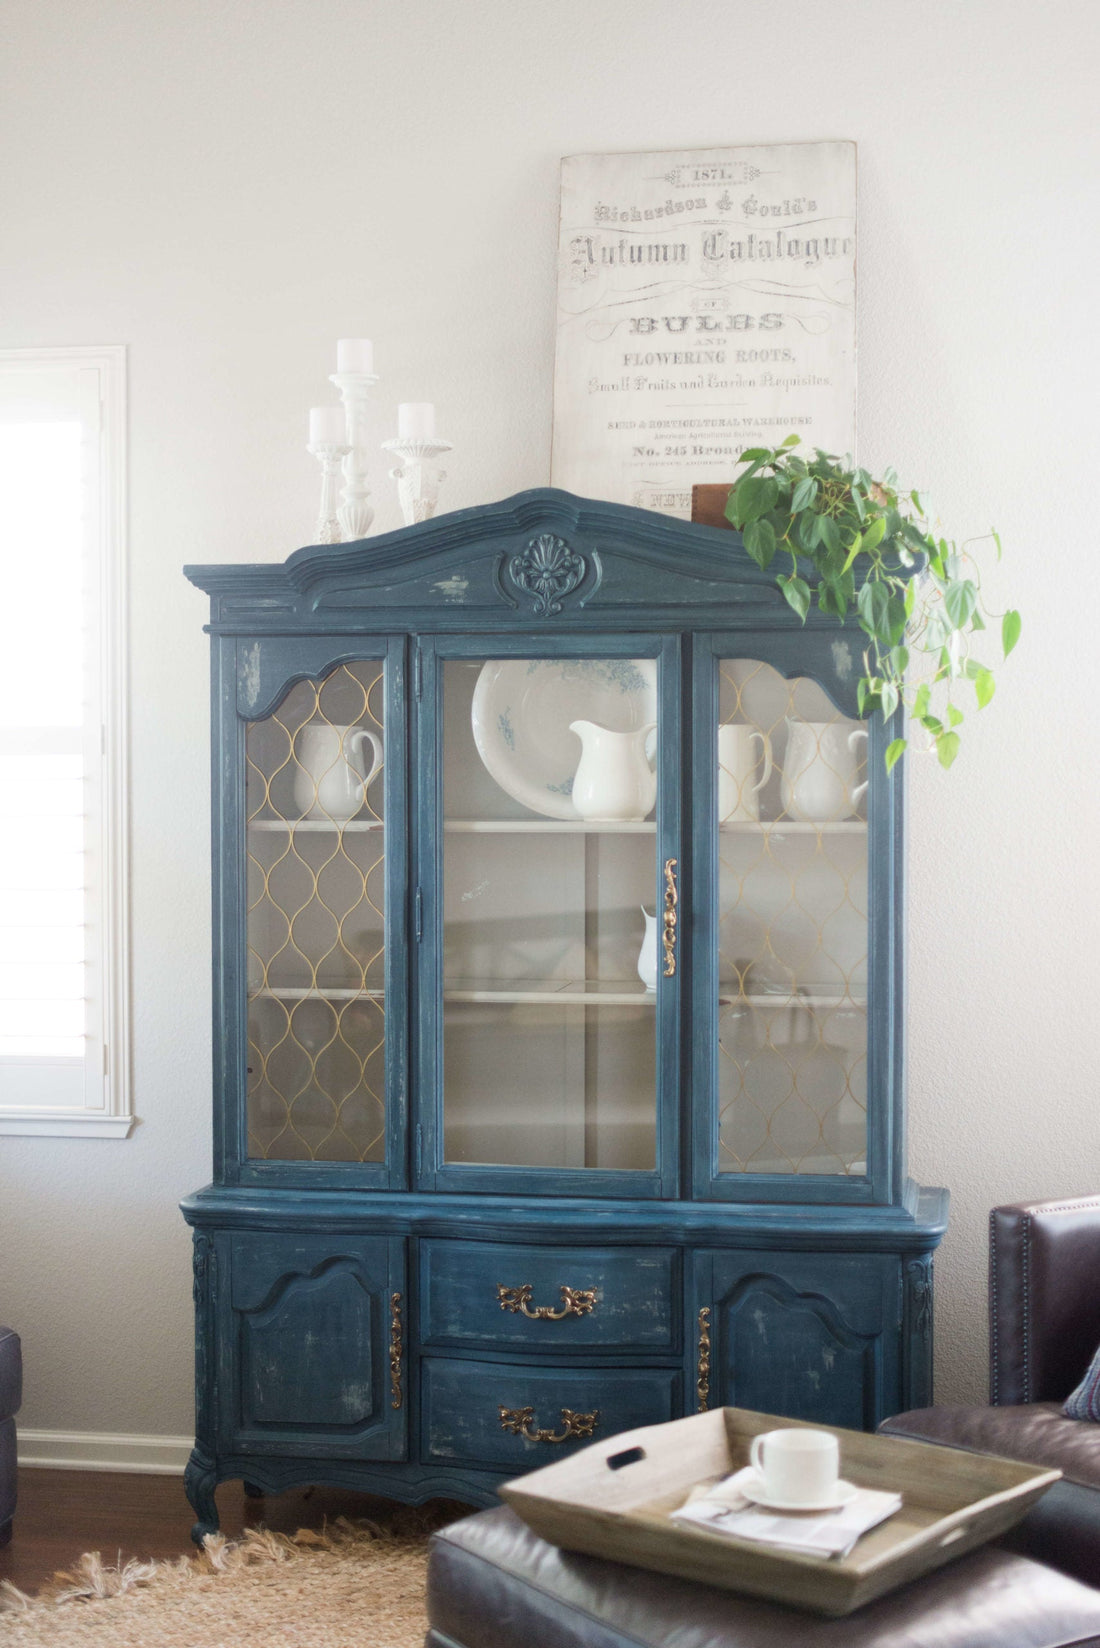 diy_chalkpainted_distessed_upcycled_hutch